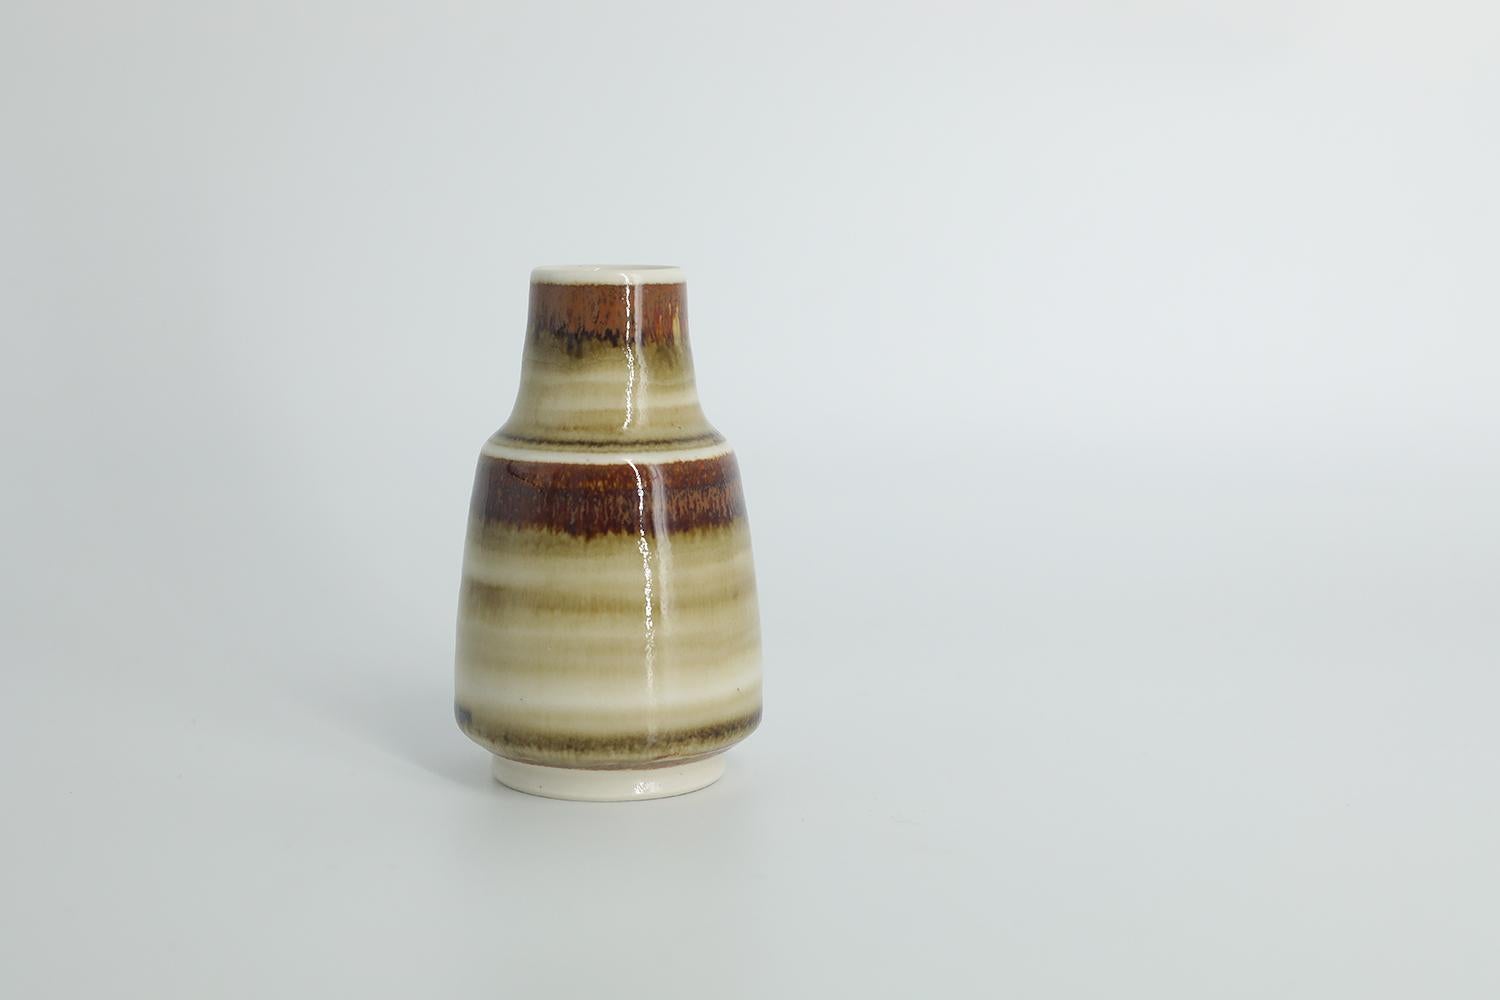 This miniature, collectible stoneware vase was designed by Gunnar Borg for the Swedish manufacture Höganäs Keramik during the 1960s. Handmade by a Master, with the utmost care and attention to details. The vase is colored in irregular shades of